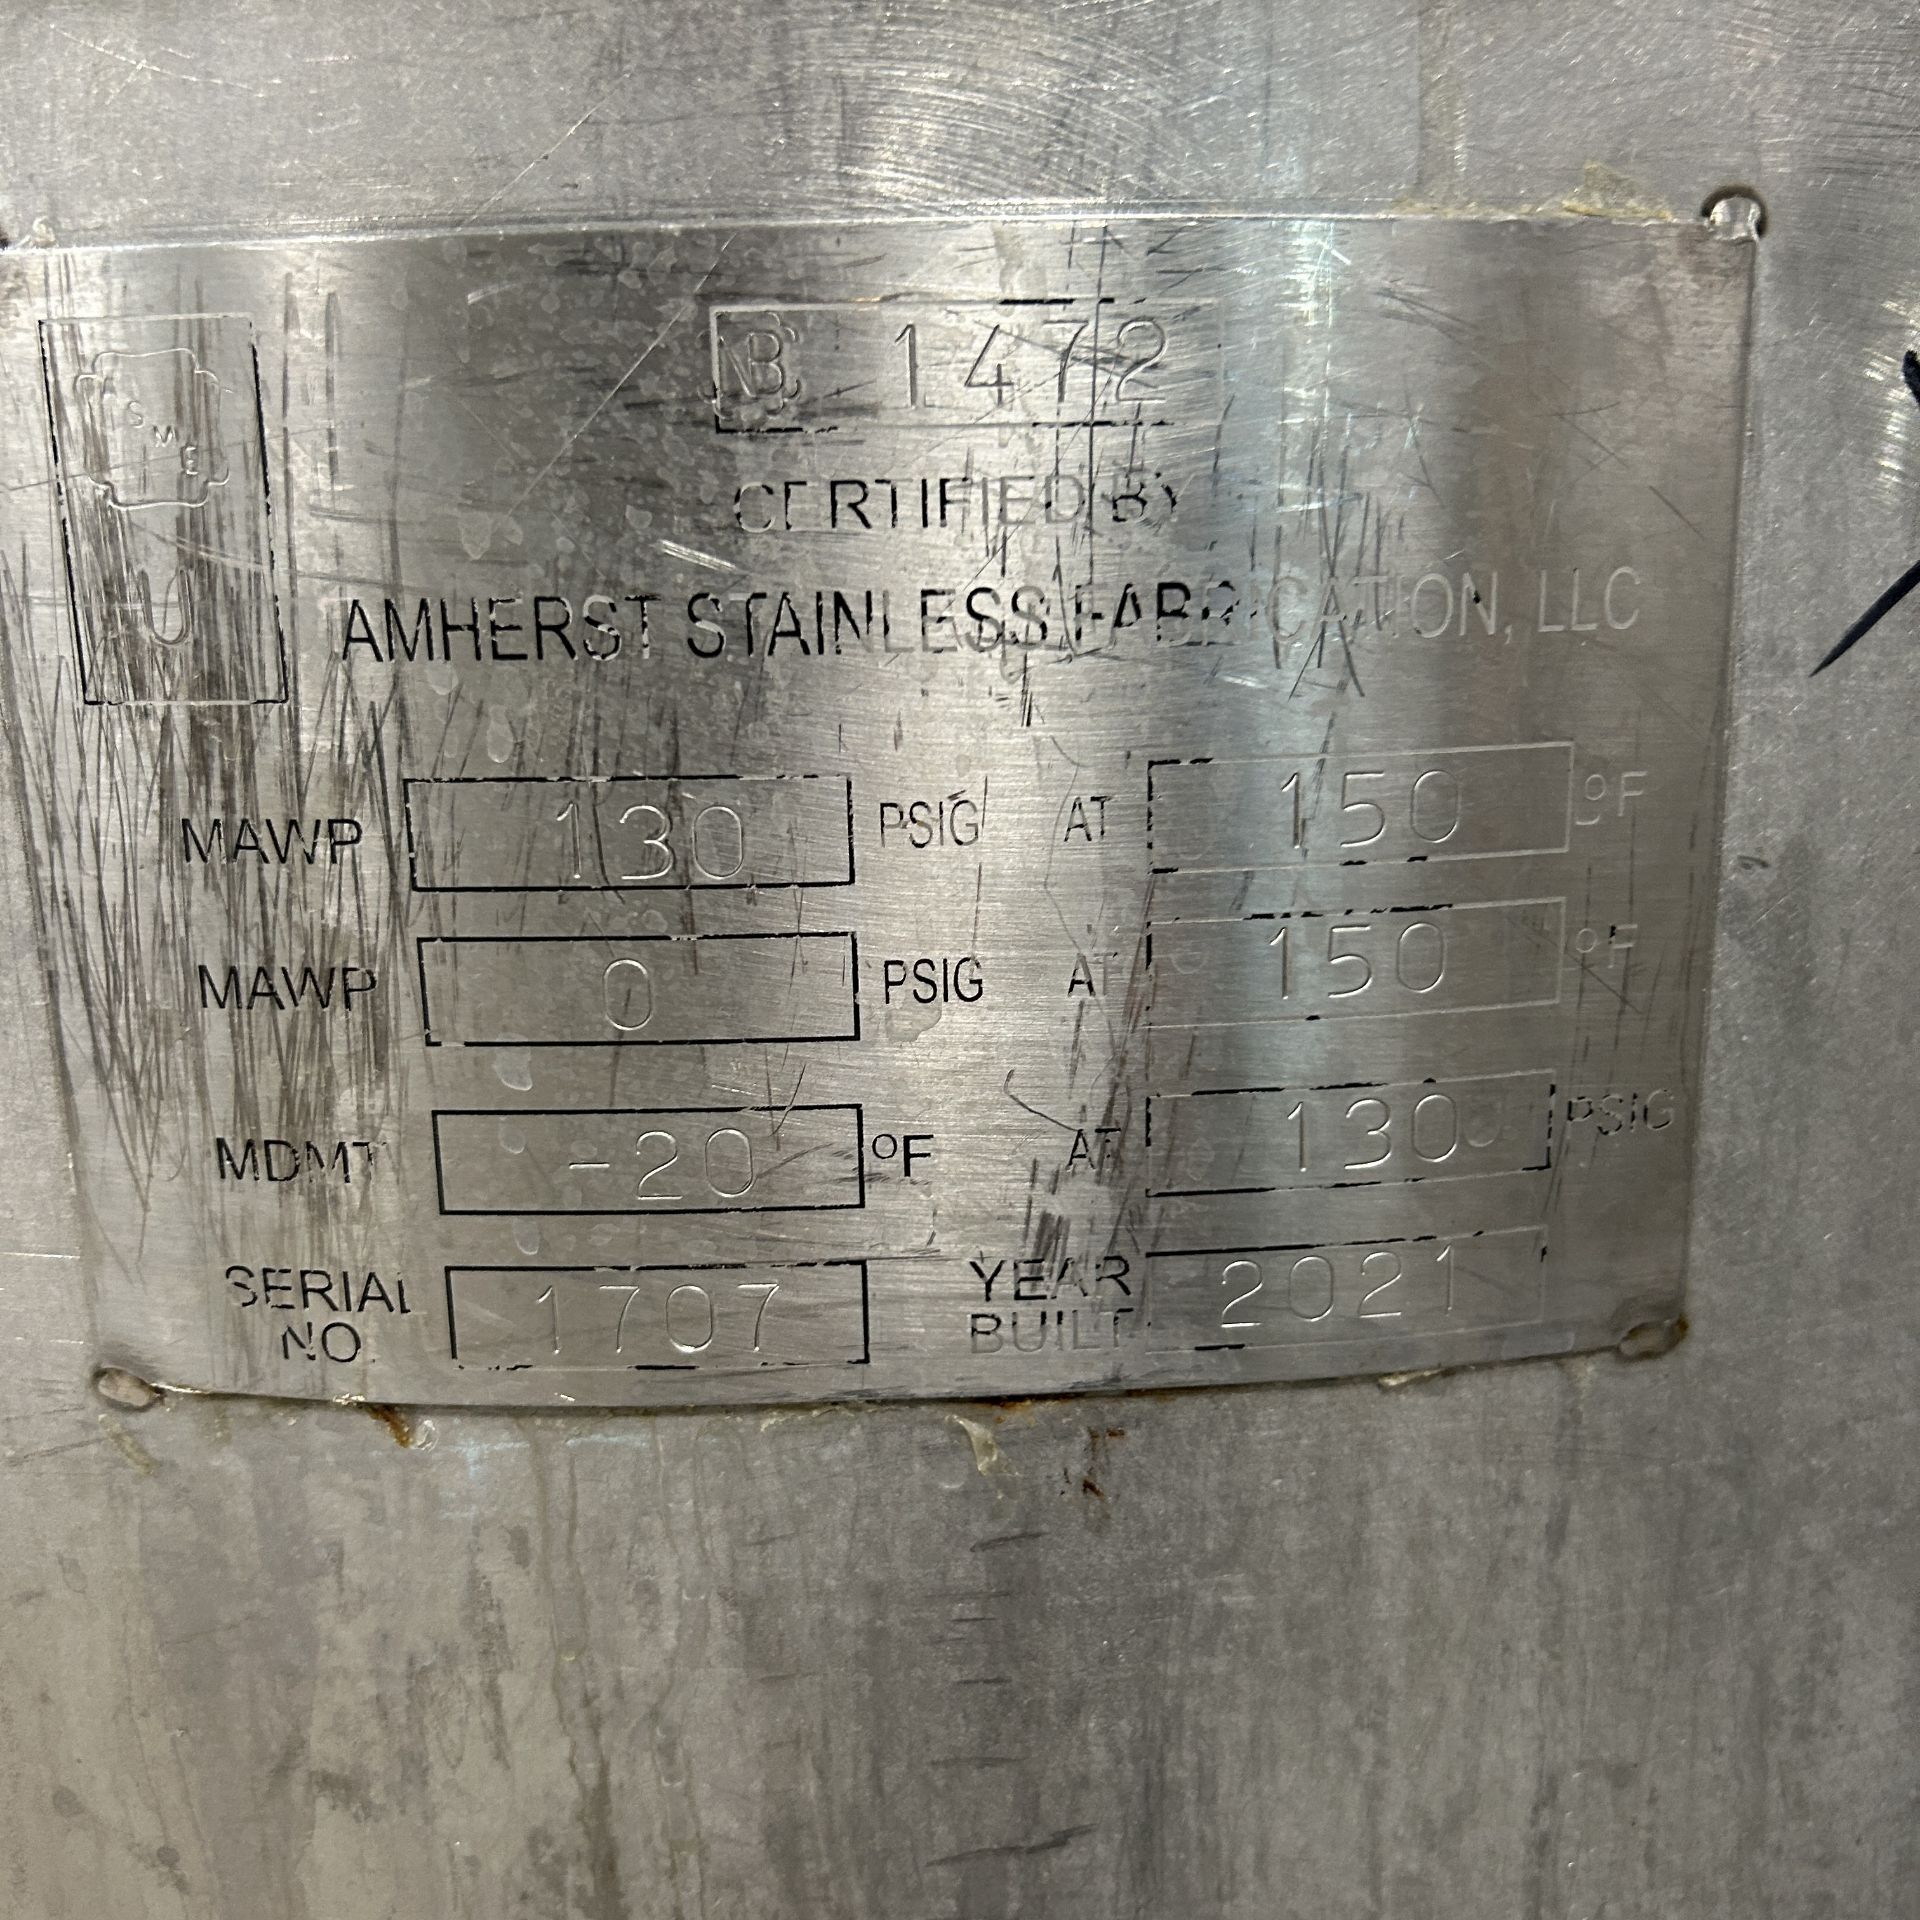 2021 Amherst Stainless Steel Agitation Pressure Pot - Image 8 of 8